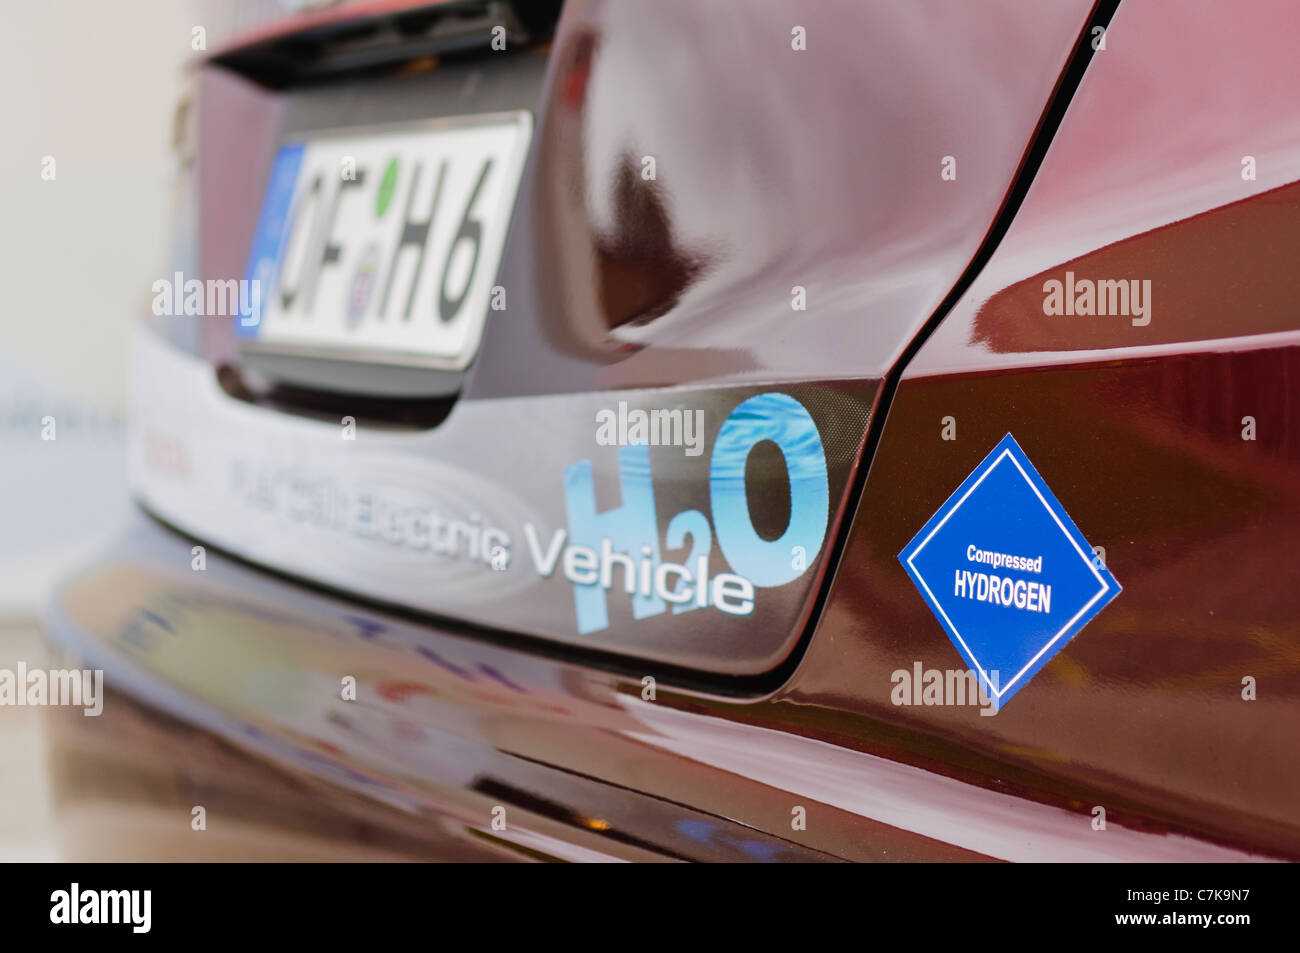 Honda FCX Clarity hydrogen fuel-cell powered car Stock Photo